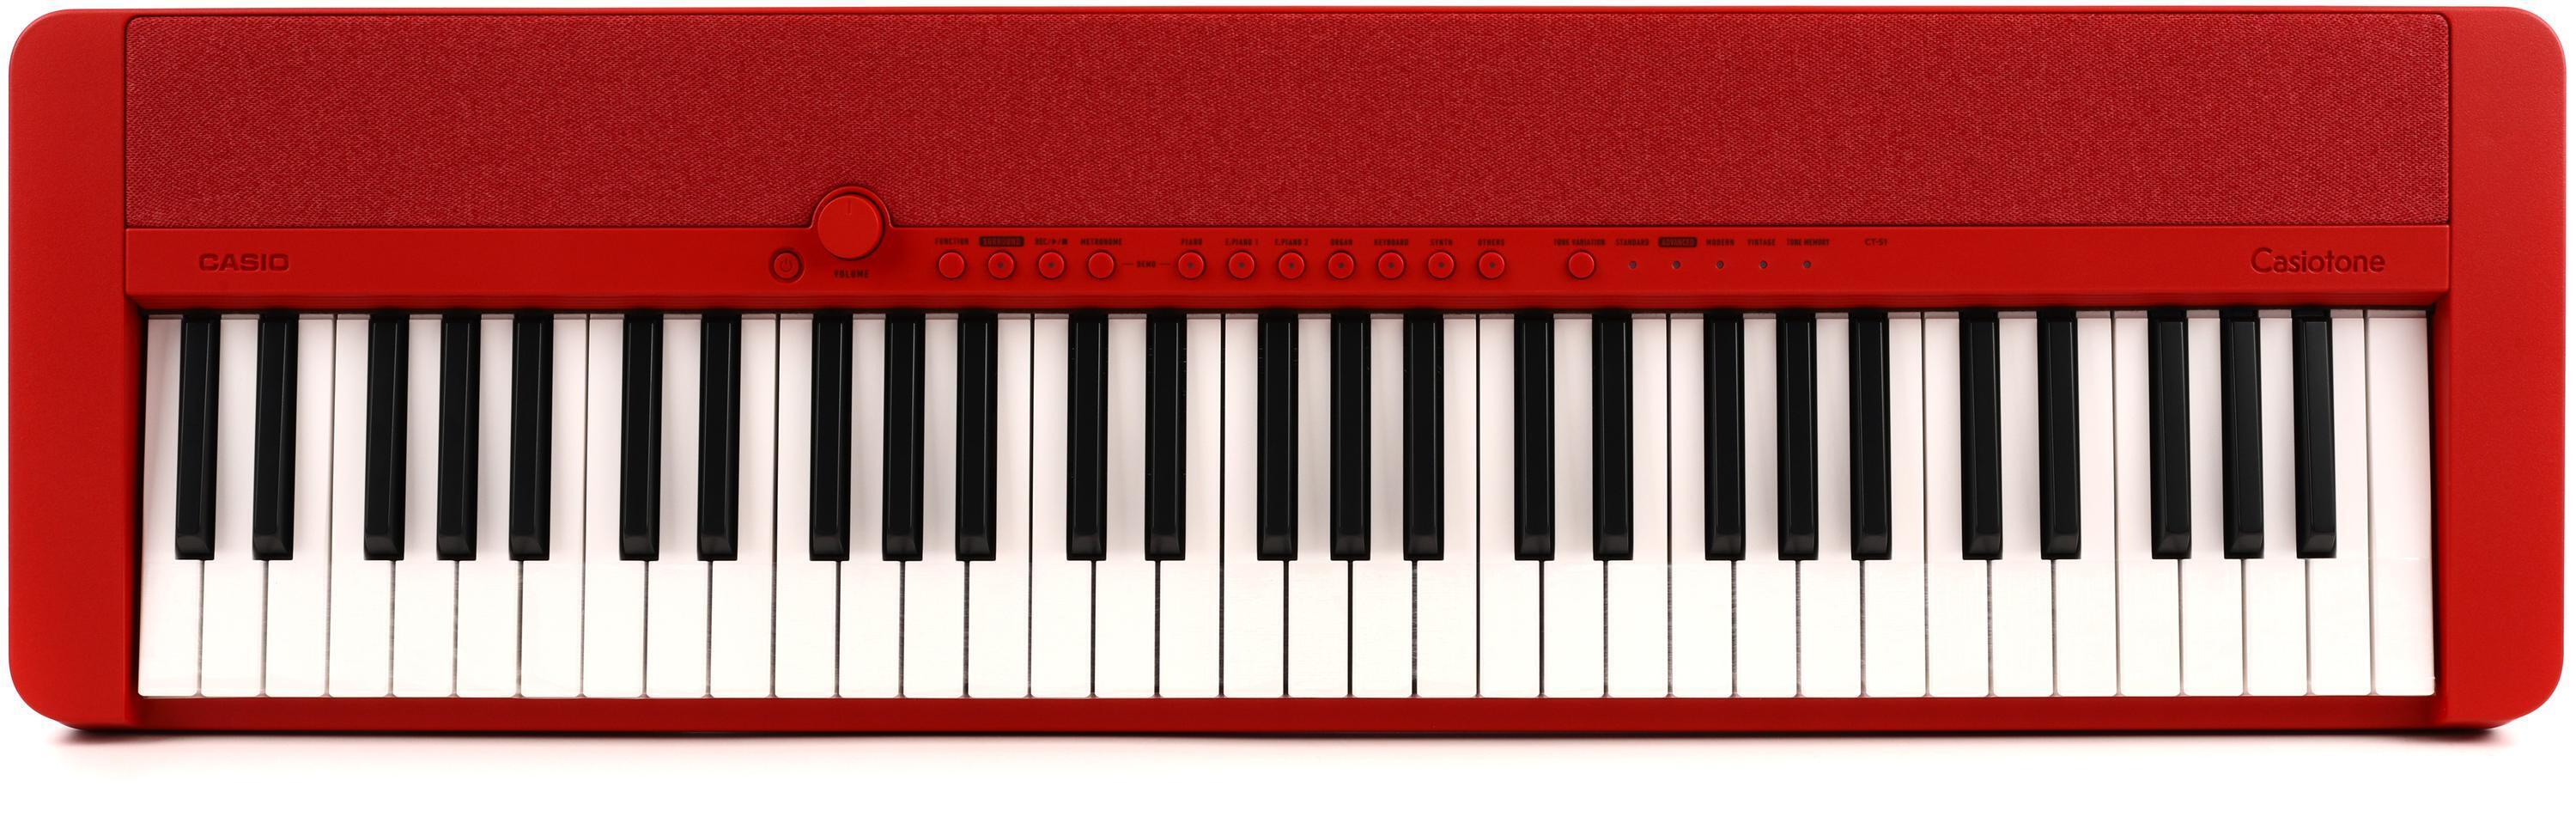 Casio CT-S1 61-key Portable Keyboard - Red | Sweetwater